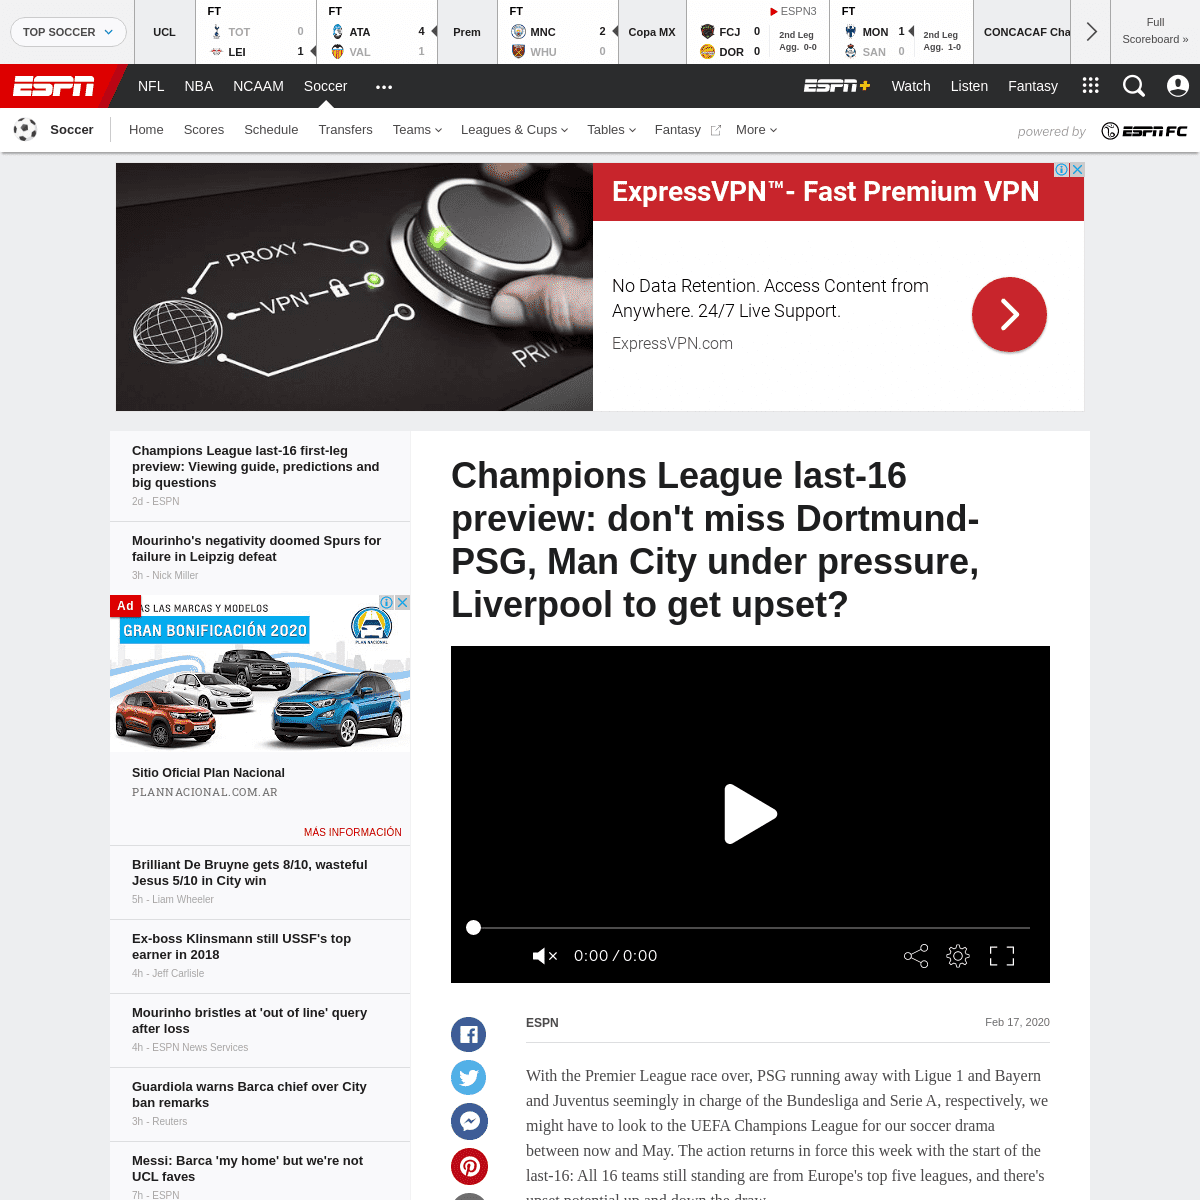 A complete backup of www.espn.com/soccer/uefa-champions-league/story/4054232/champions-league-last-16-preview-dont-miss-dortmund